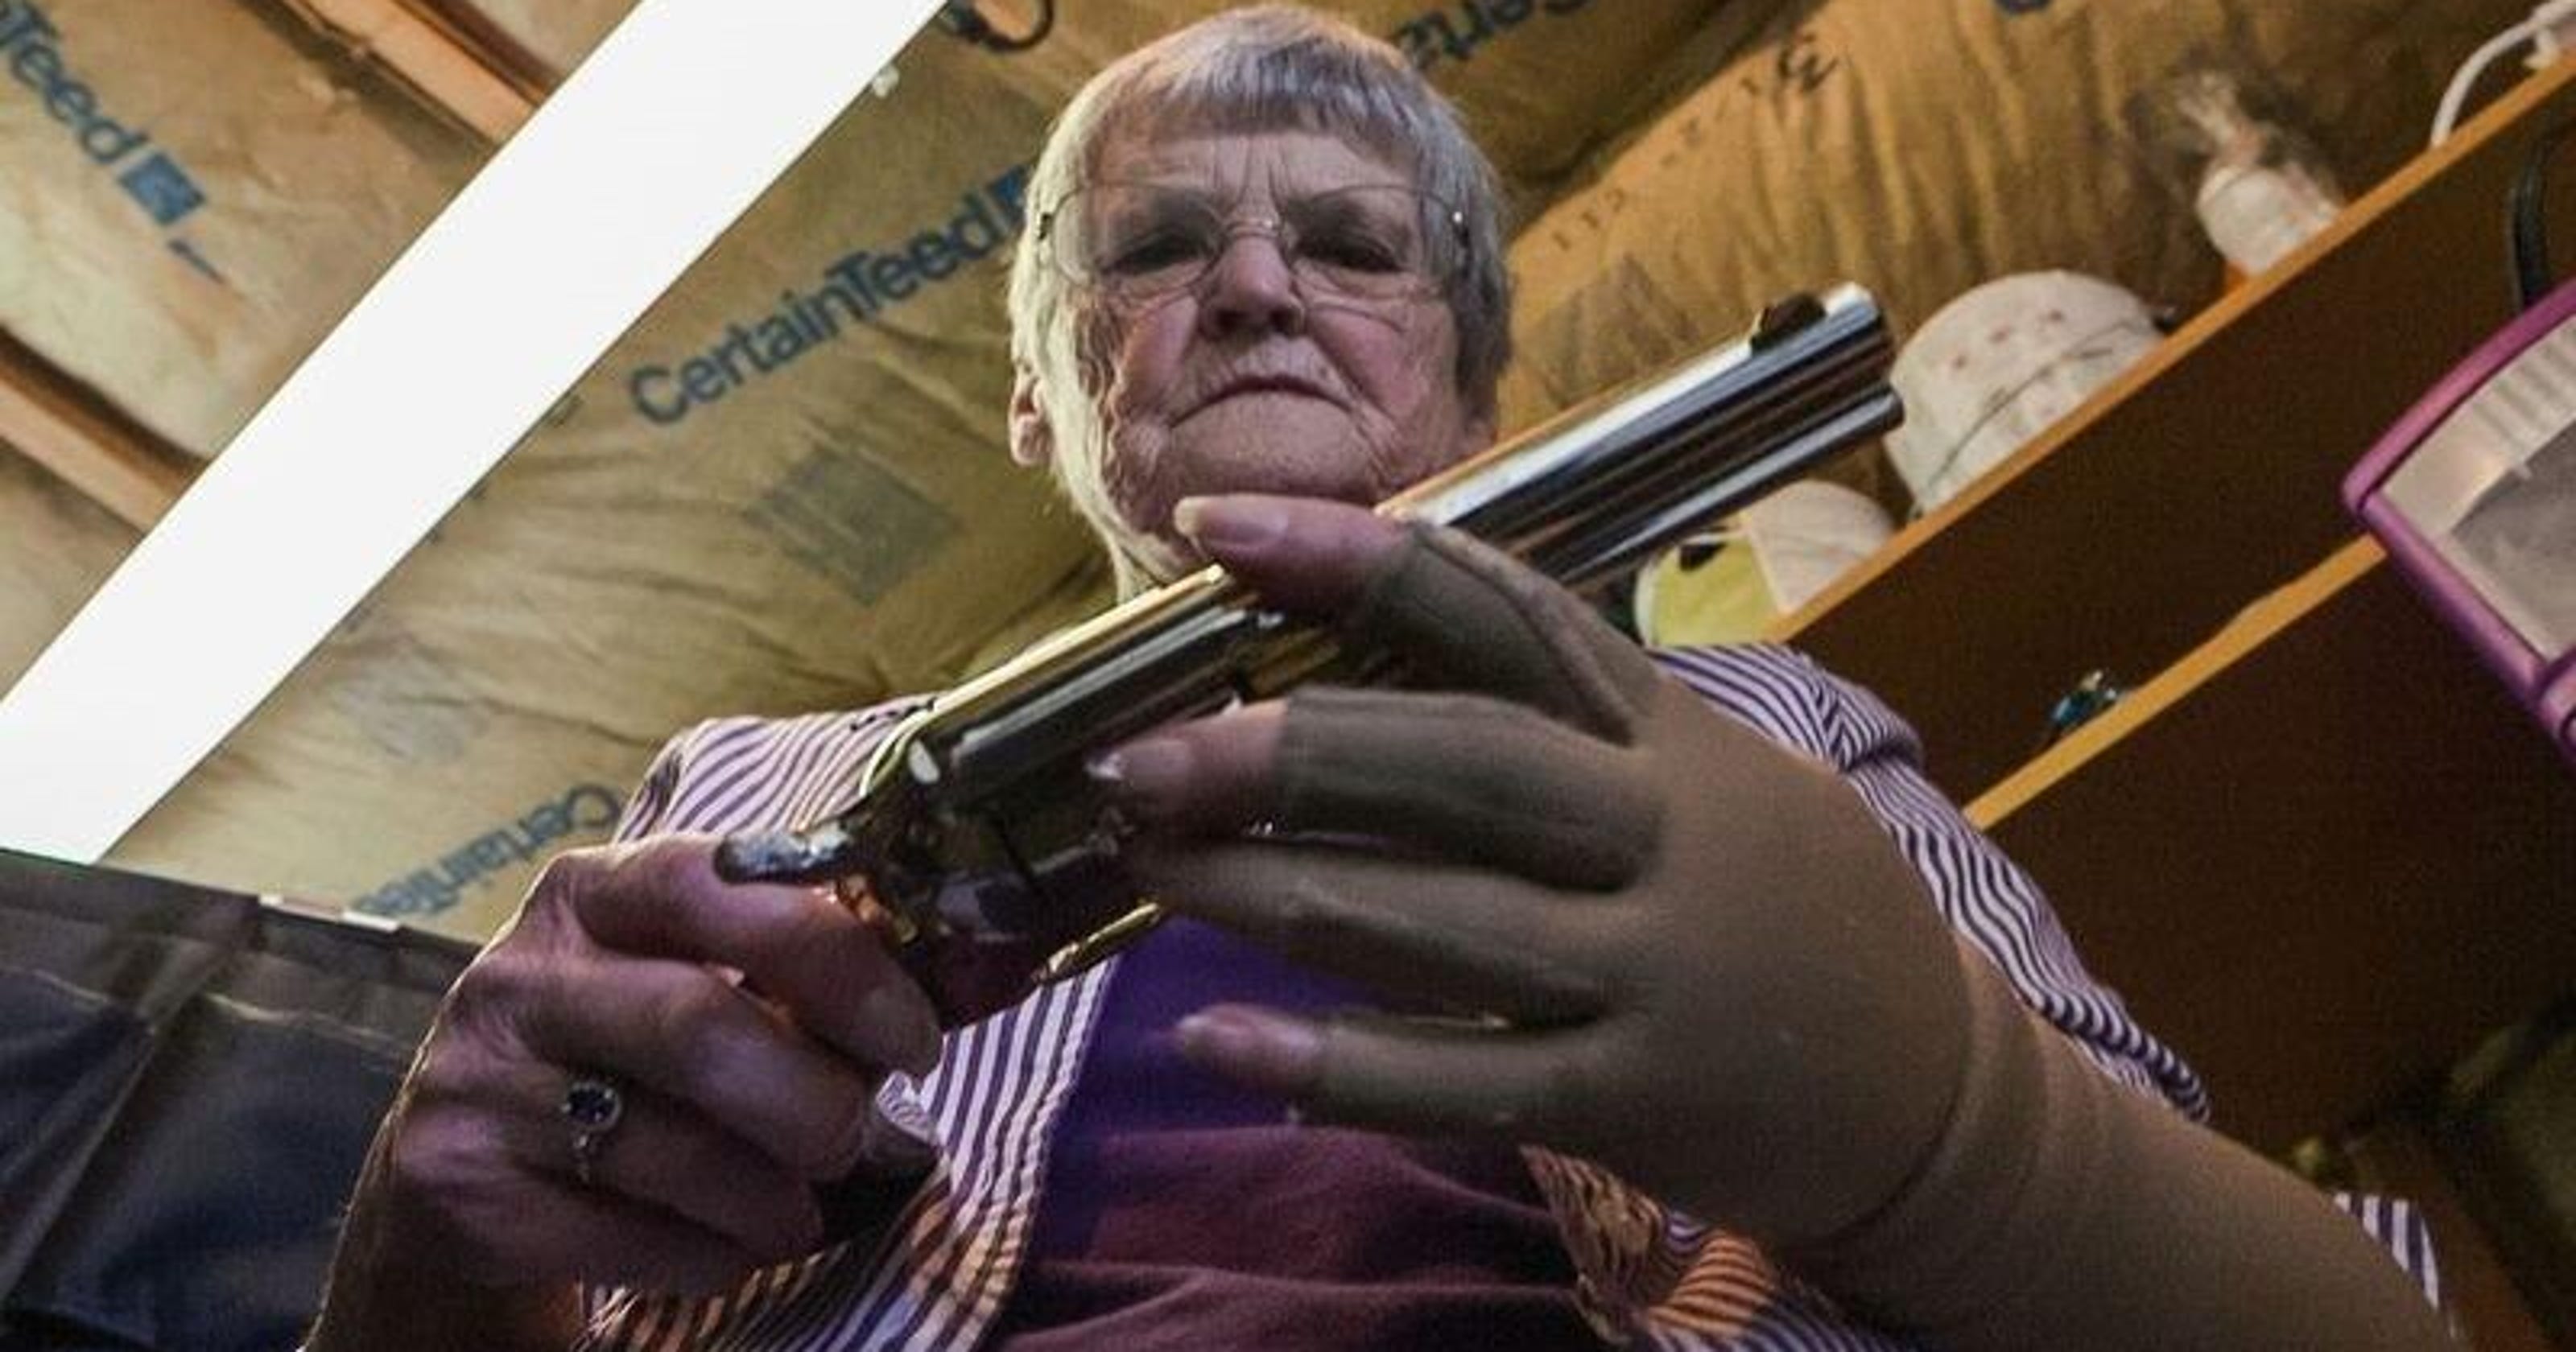 Few Laws to Address Growing Issue of Elderly Gun Owners with Dementia